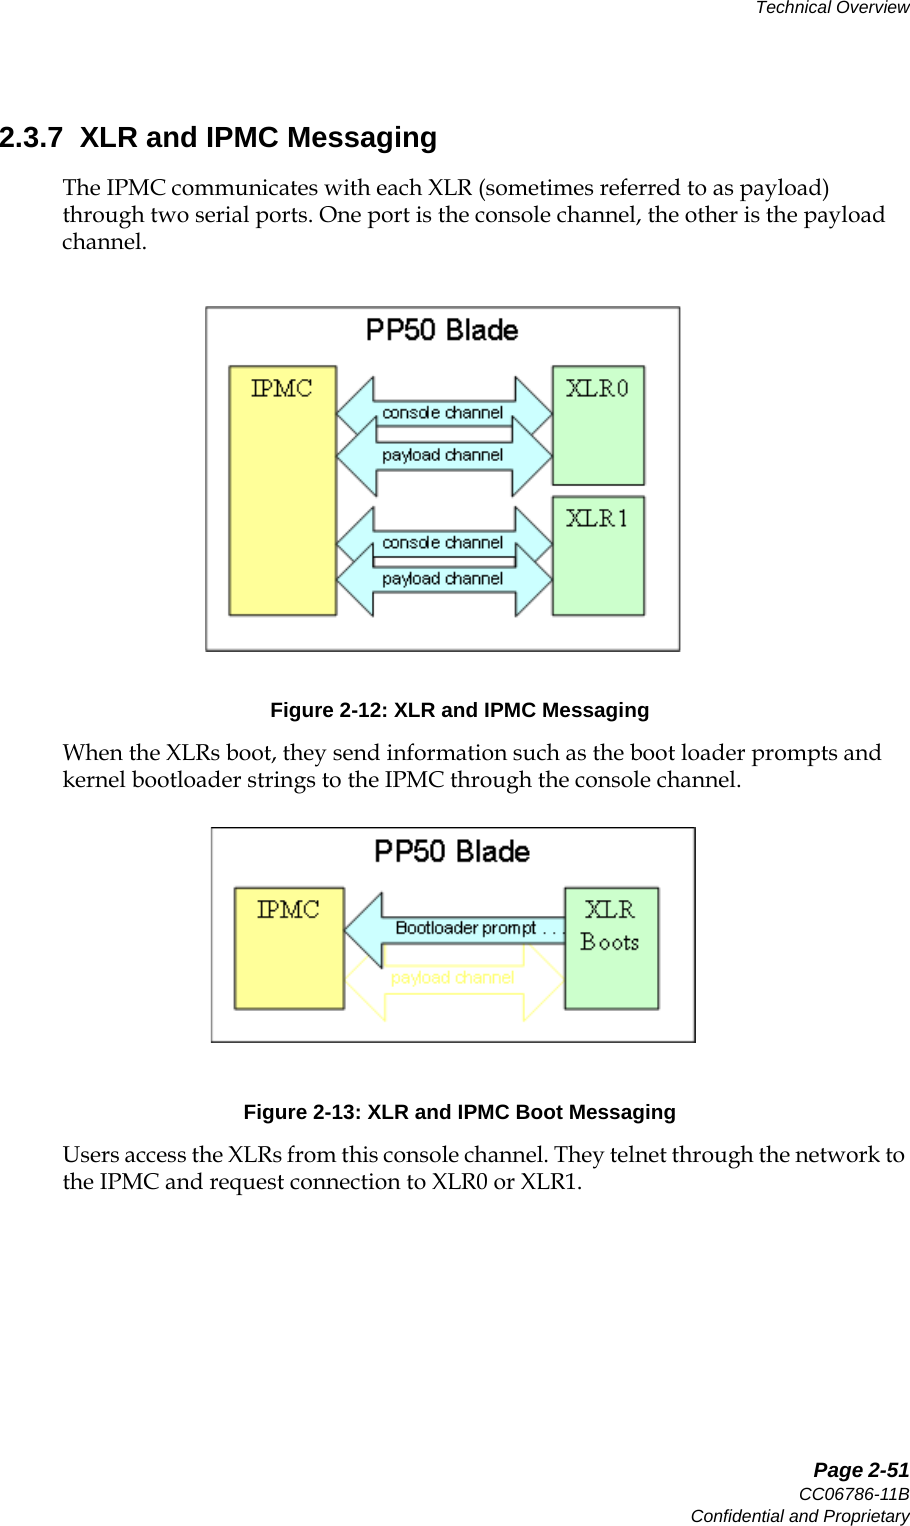   Page 2-51CC06786-11BConfidential and ProprietaryTechnical Overview14ABABPreliminary2.3.7  XLR and IPMC MessagingThe IPMC communicates with each XLR (sometimes referred to as payload) through two serial ports. One port is the console channel, the other is the payload channel. Figure 2-12: XLR and IPMC MessagingWhen the XLRs boot, they send information such as the boot loader prompts and kernel bootloader strings to the IPMC through the console channel. Figure 2-13: XLR and IPMC Boot MessagingUsers access the XLRs from this console channel. They telnet through the network to the IPMC and request connection to XLR0 or XLR1.